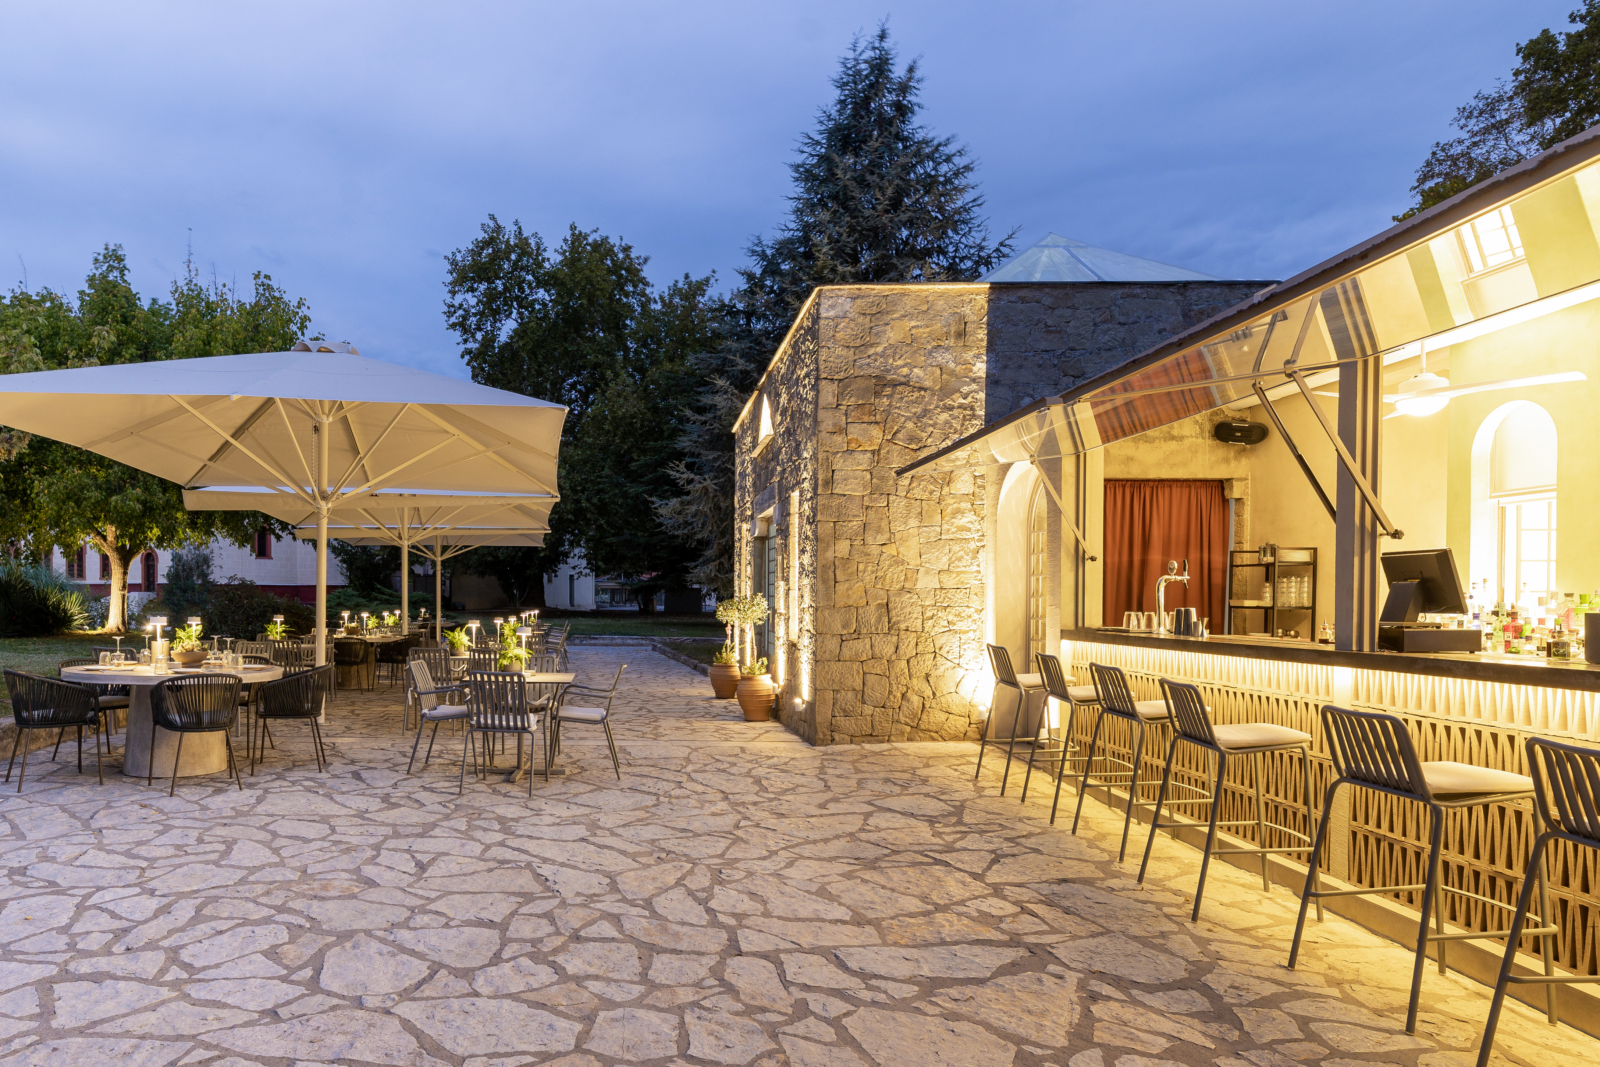 Archisearch The little mosque. All day bar & restaurant in Trikala | by Studio pluslines.